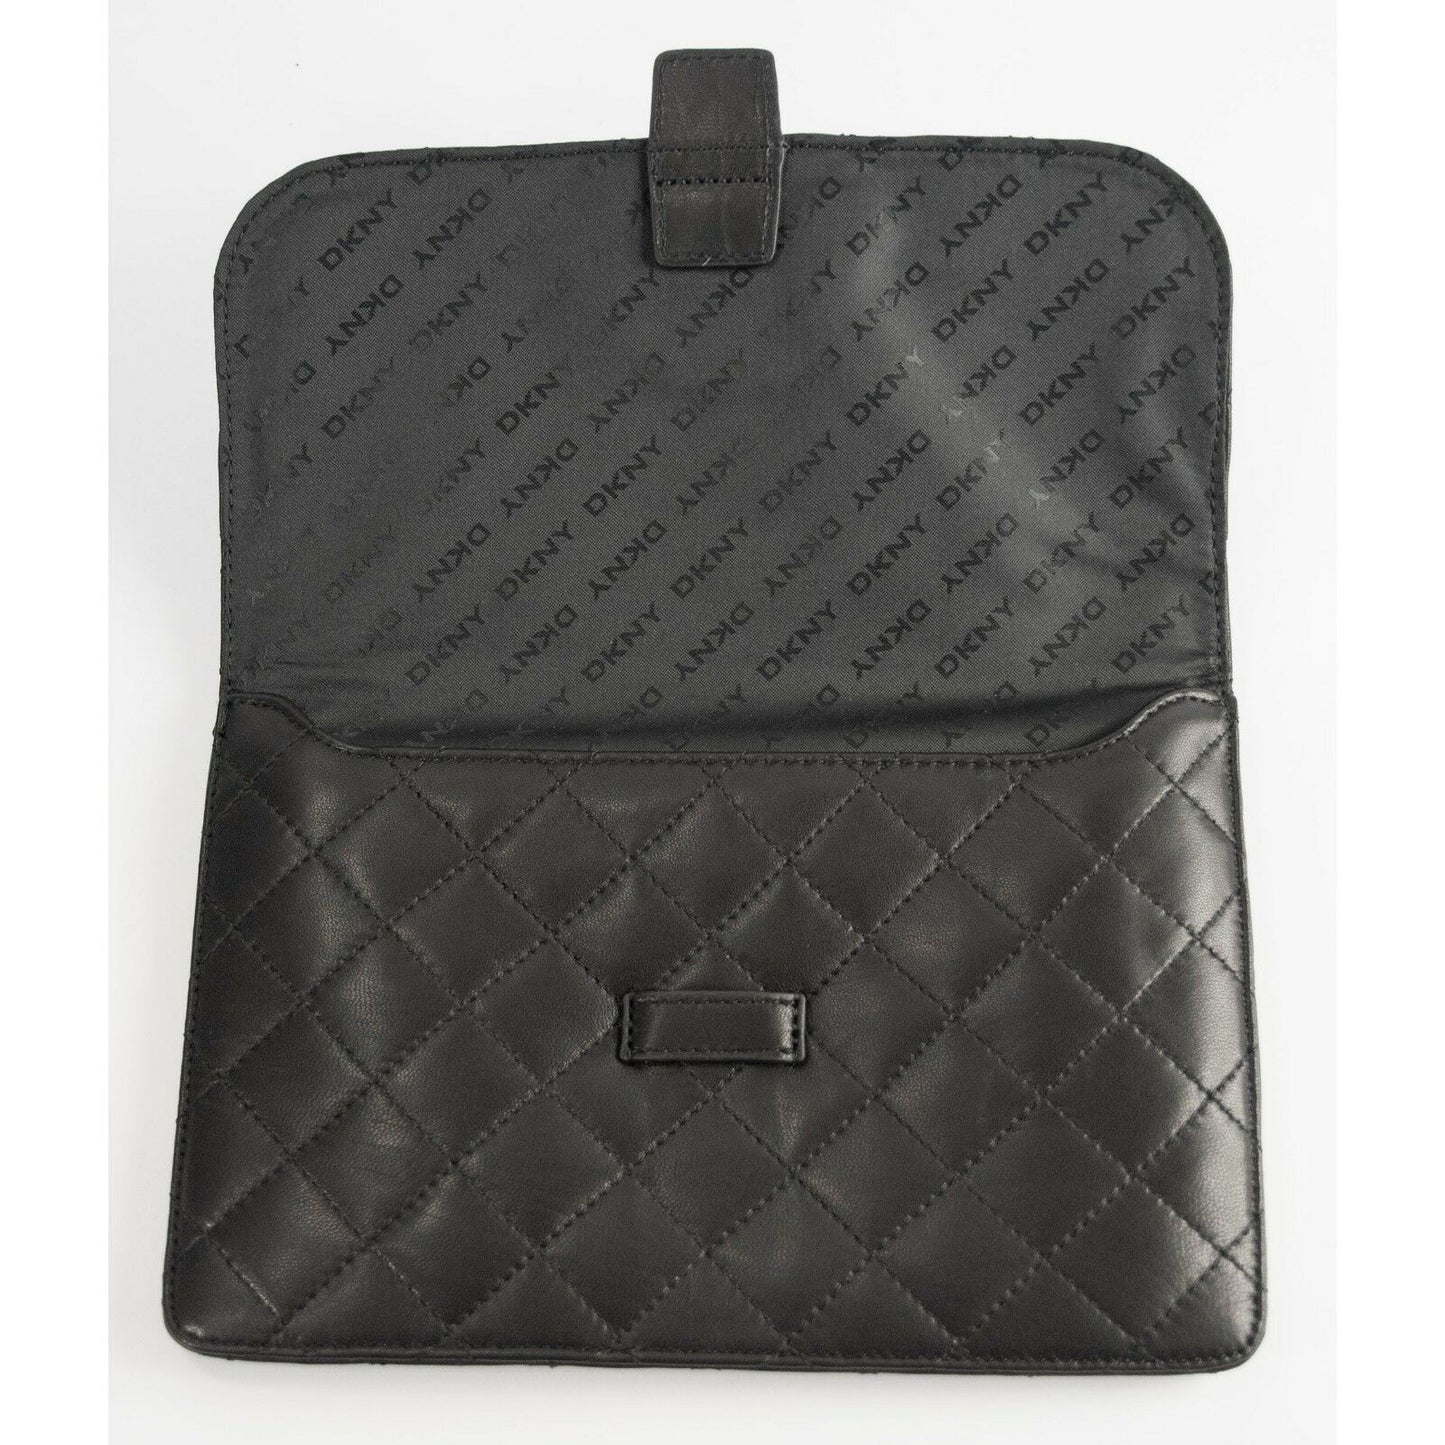 DKNY Quilted Nappa Black Leather Mini iPad Tablet Kindle Sleeve Clutch NWT